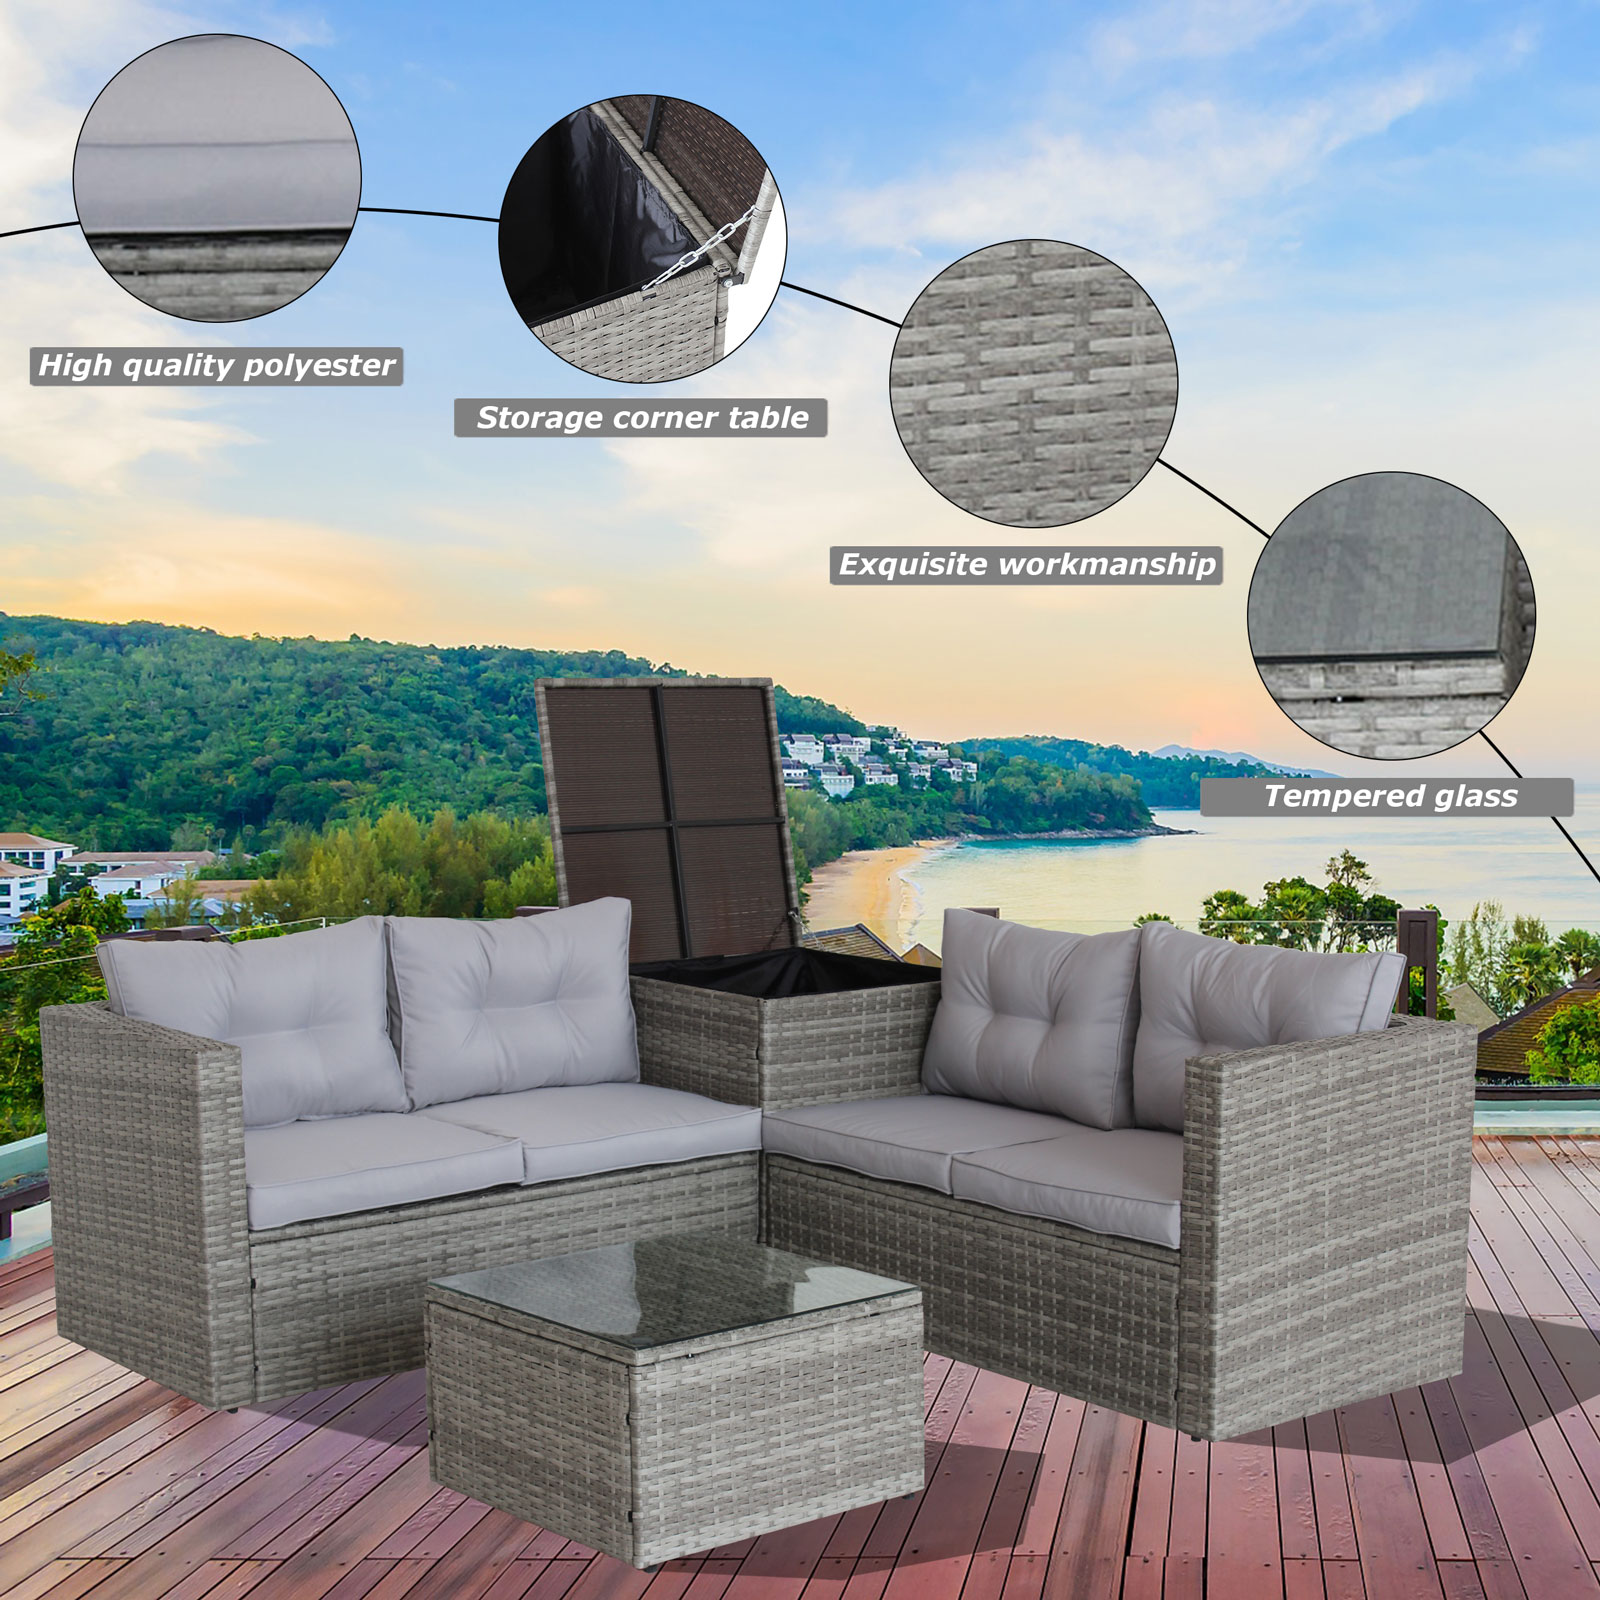 Outdoor Patio Furniture Set, 4-Piece Gray Wicker Patio Furniture Sets, Rattan Wicker Conversation Set w/L-Seats Sofa, R-Seats Sofa, Cushion box, Glass Dining Table, Padded Cushions, Beige, S1555 - image 5 of 10